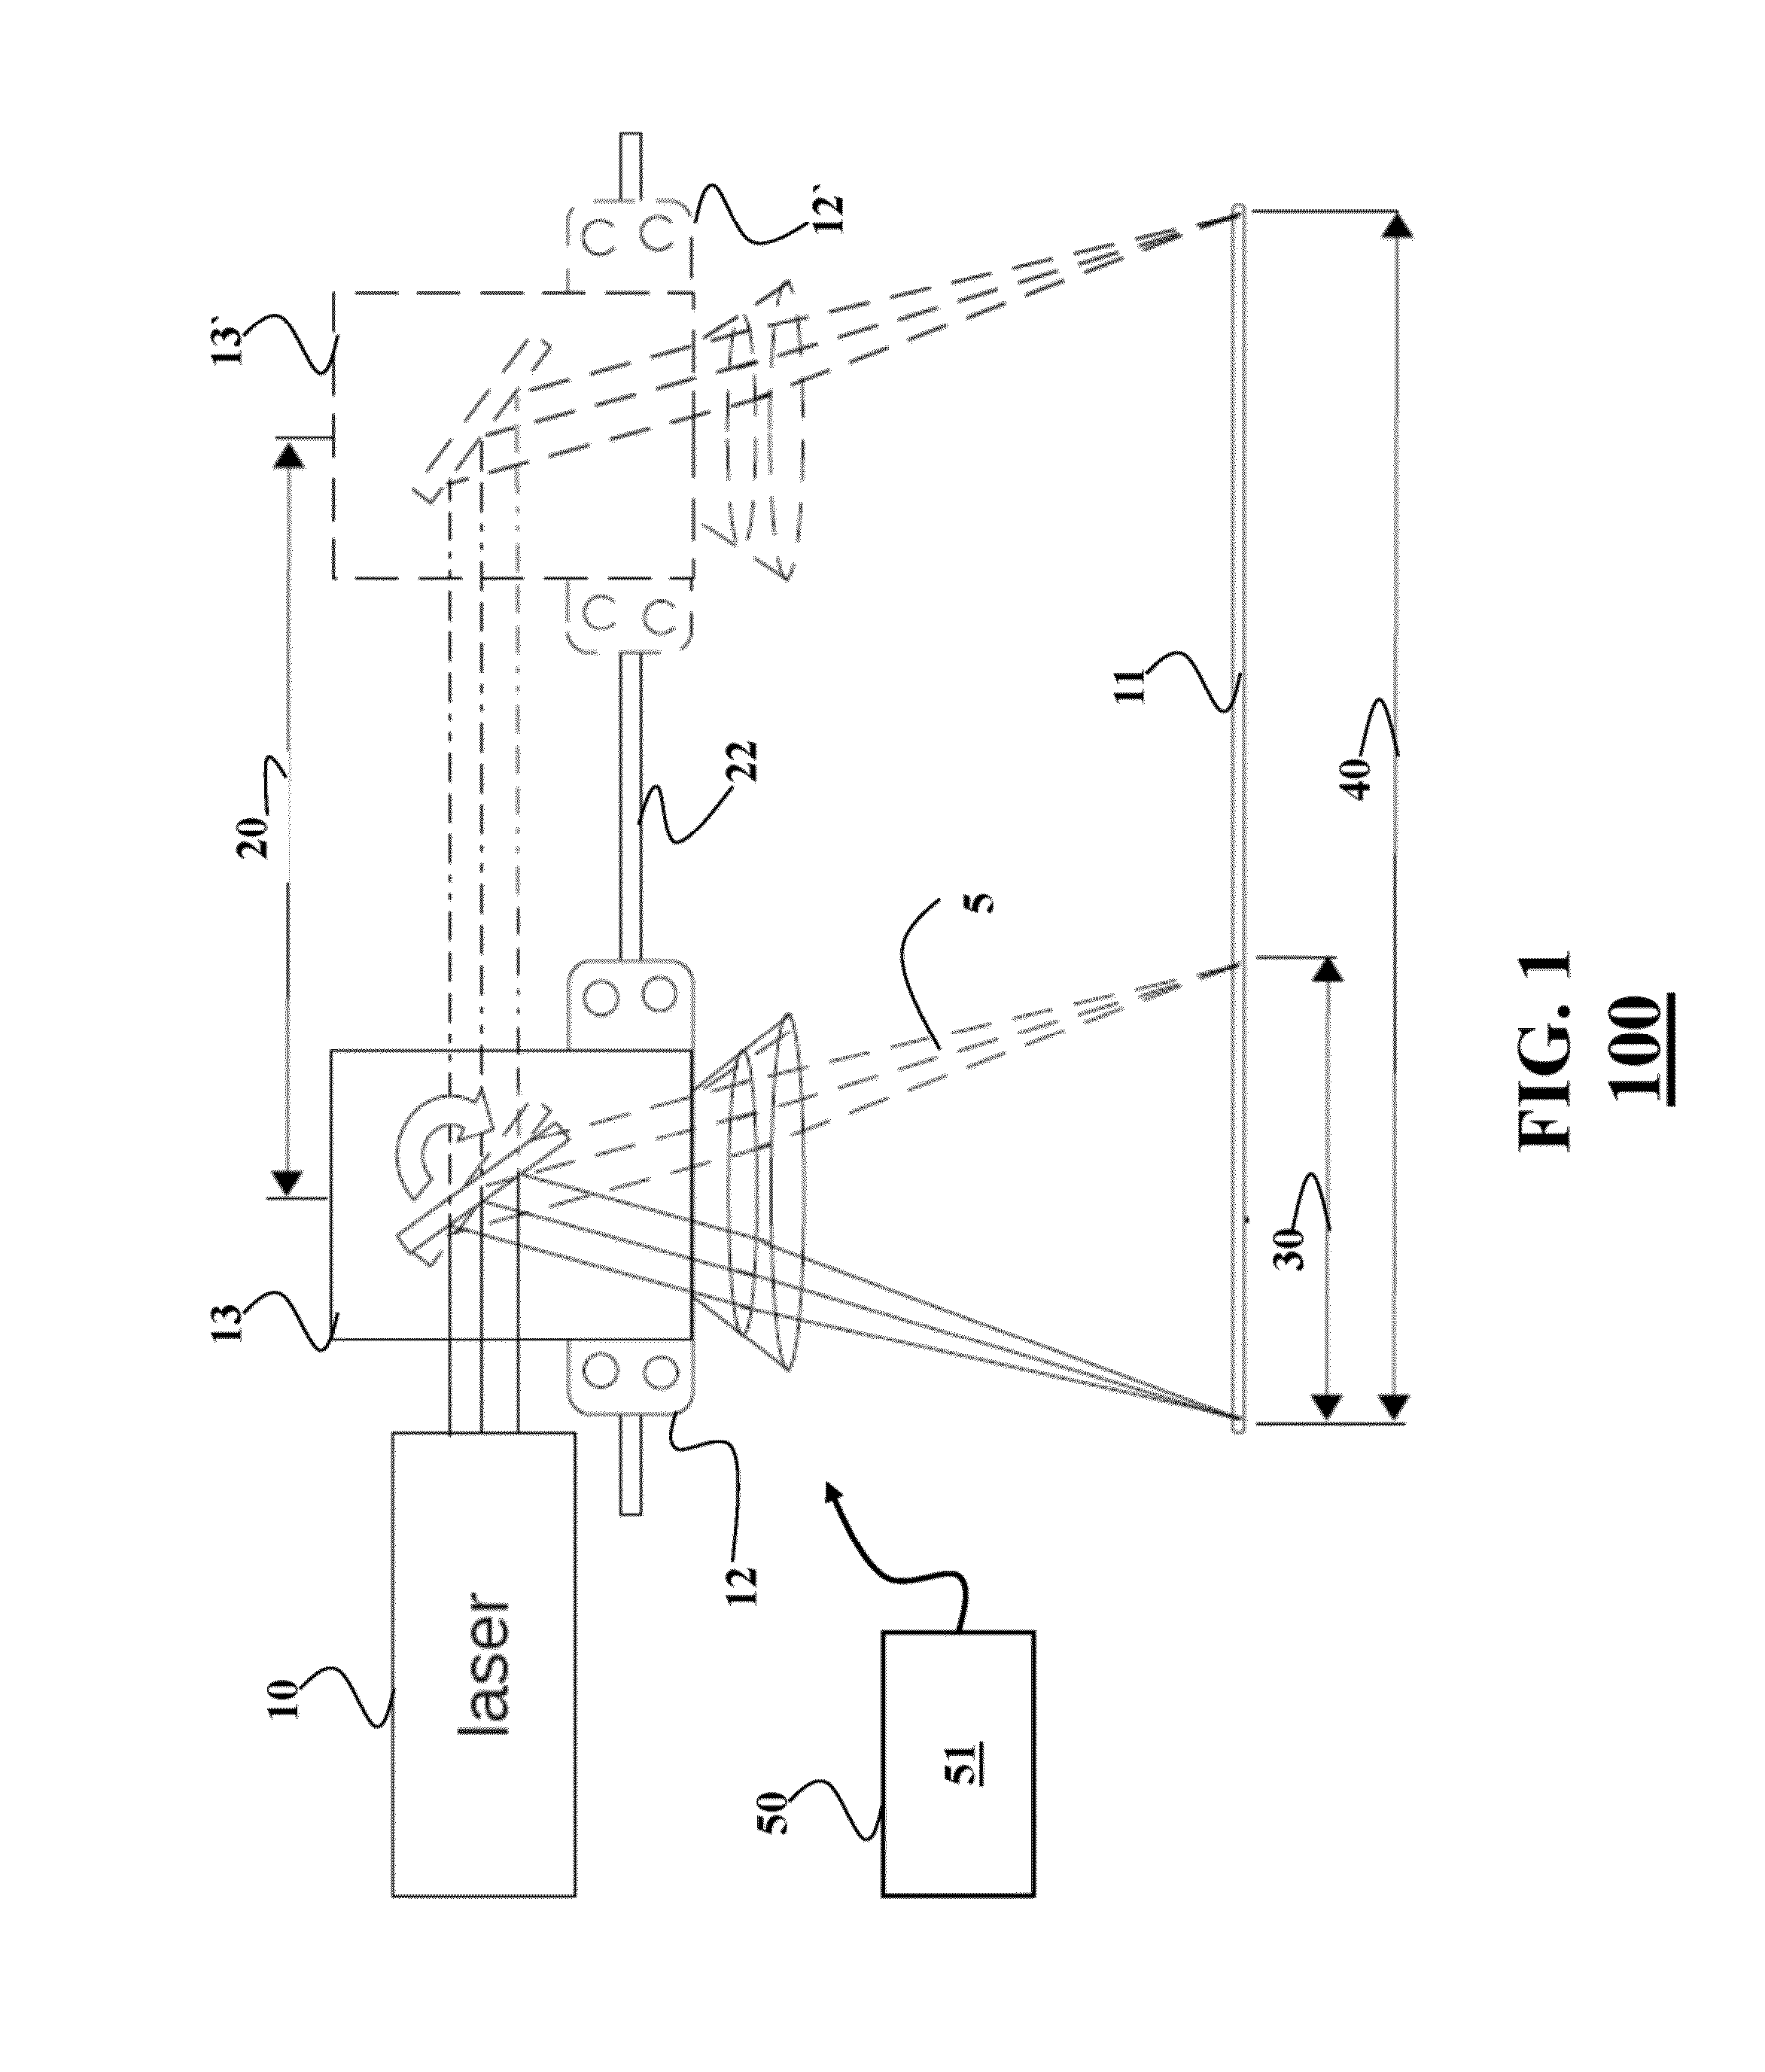 System and Method for Controlling Redundant Actuators of a Machine